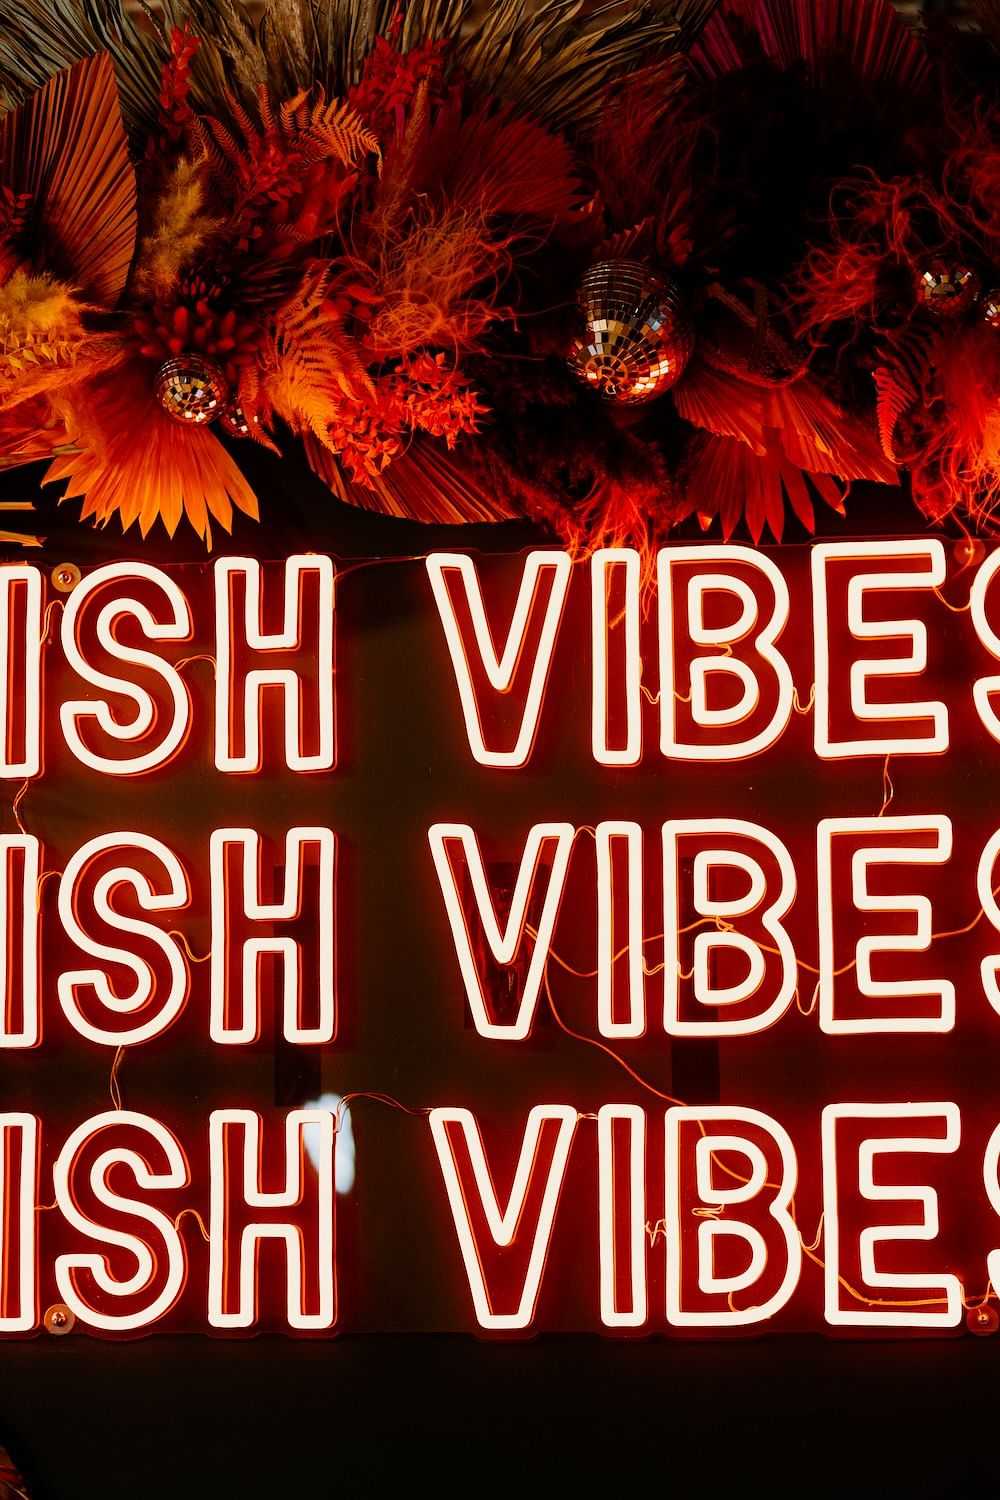 Neon sign reading "WISH VIBES" with floral decor in the background.